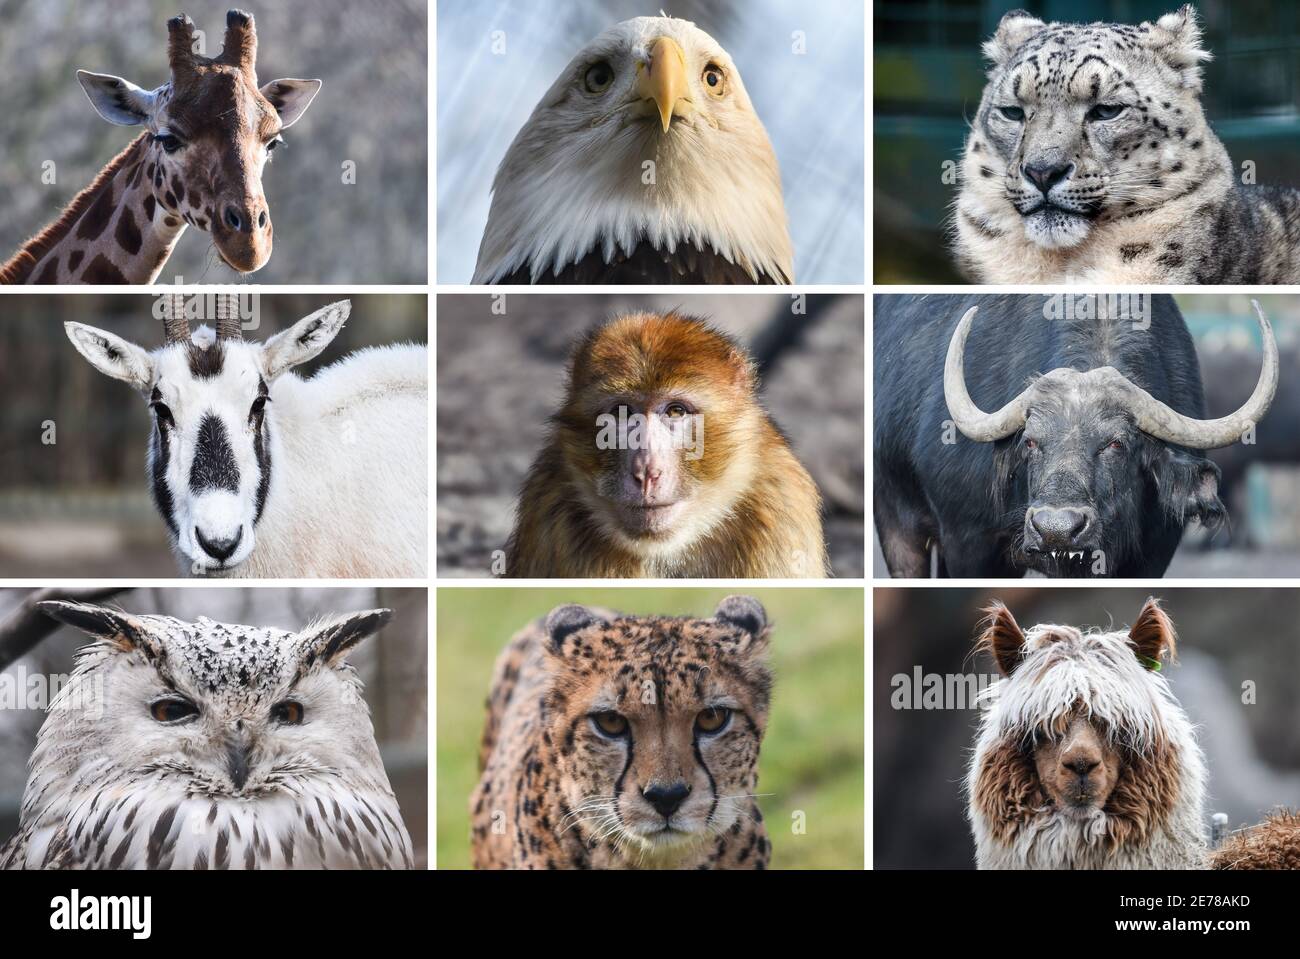 Berlin, Germany. 27th Jan, 2021. Impressions from the zoo:(top/from left) Rothschild giraffe, bald eagle, snow leopard; (middle/from left) oryx antelope, Barbary Cape buffalo or black buffalo; (bottom/from left) Siberian eagle owl,